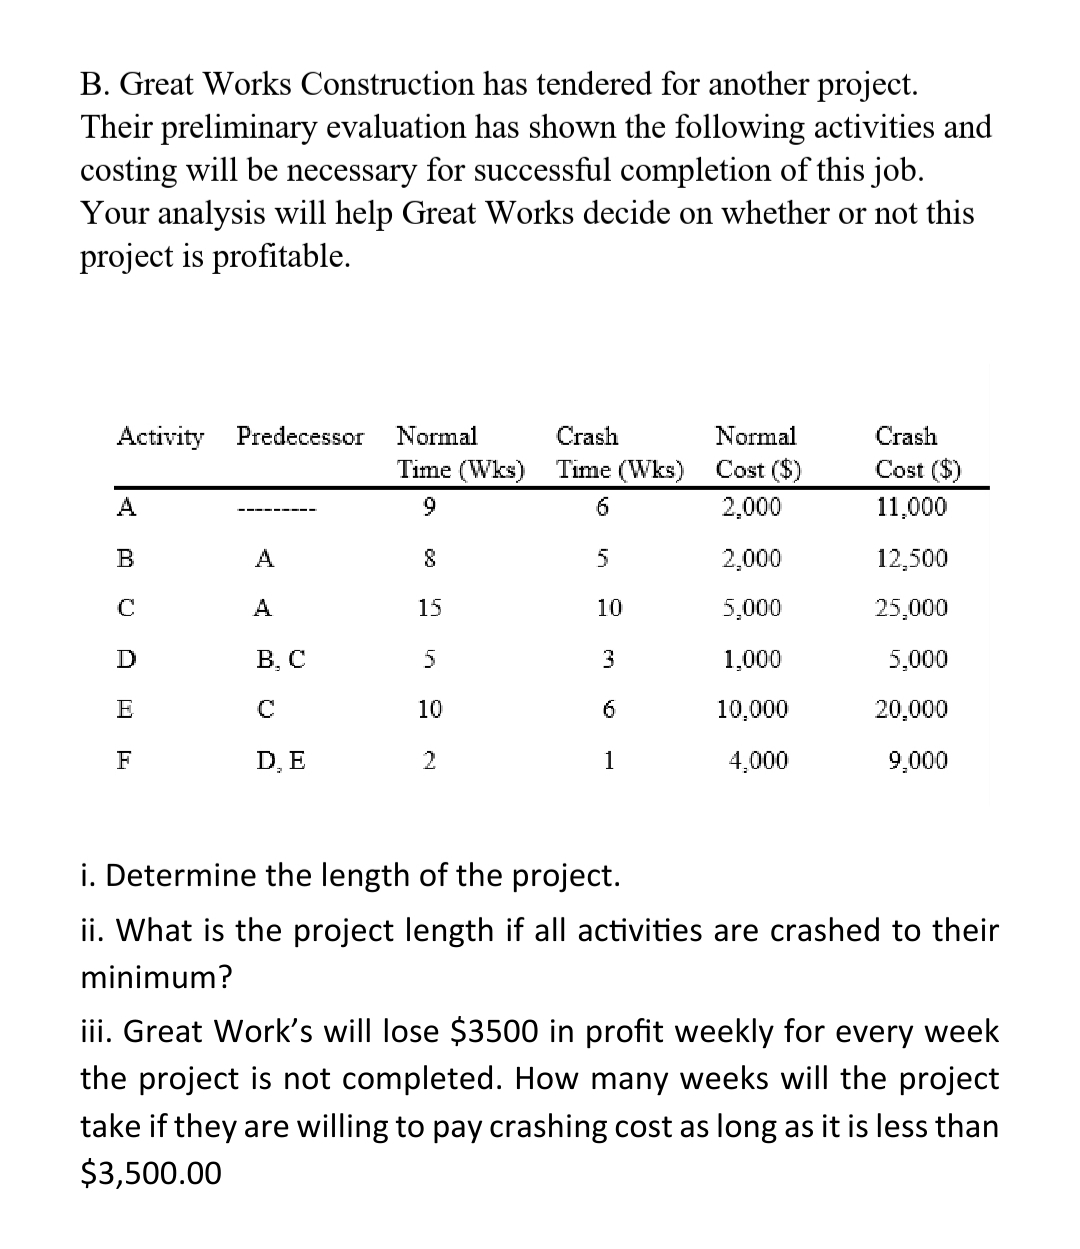 B. Great Works Construction has tendered for another project.
Their preliminary evaluation has shown the following activities and
costing will be necessary for successful completion of this job.
Your analysis will help Great Works decide on whether or not this
project is profitable.
Activity Predecessor
A
B
C
D
E
F
A
A
B, C
C
D, E
Normal
Time (Wks)
9
8
15
5
10
2
Crash
Time (Wks)
6
5
10
3
6
1
Normal
Cost ($)
2,000
2,000
5,000
1,000
10,000
4,000
Crash
Cost ($)
11,000
12,500
25,000
5,000
20,000
9,000
i. Determine the length of the project.
ii. What is the project length if all activities are crashed to their
minimum?
iii. Great Work's will lose $3500 in profit weekly for every week
the project is not completed. How many weeks will the project
take if they are willing to pay crashing cost as long as it is less than
$3,500.00